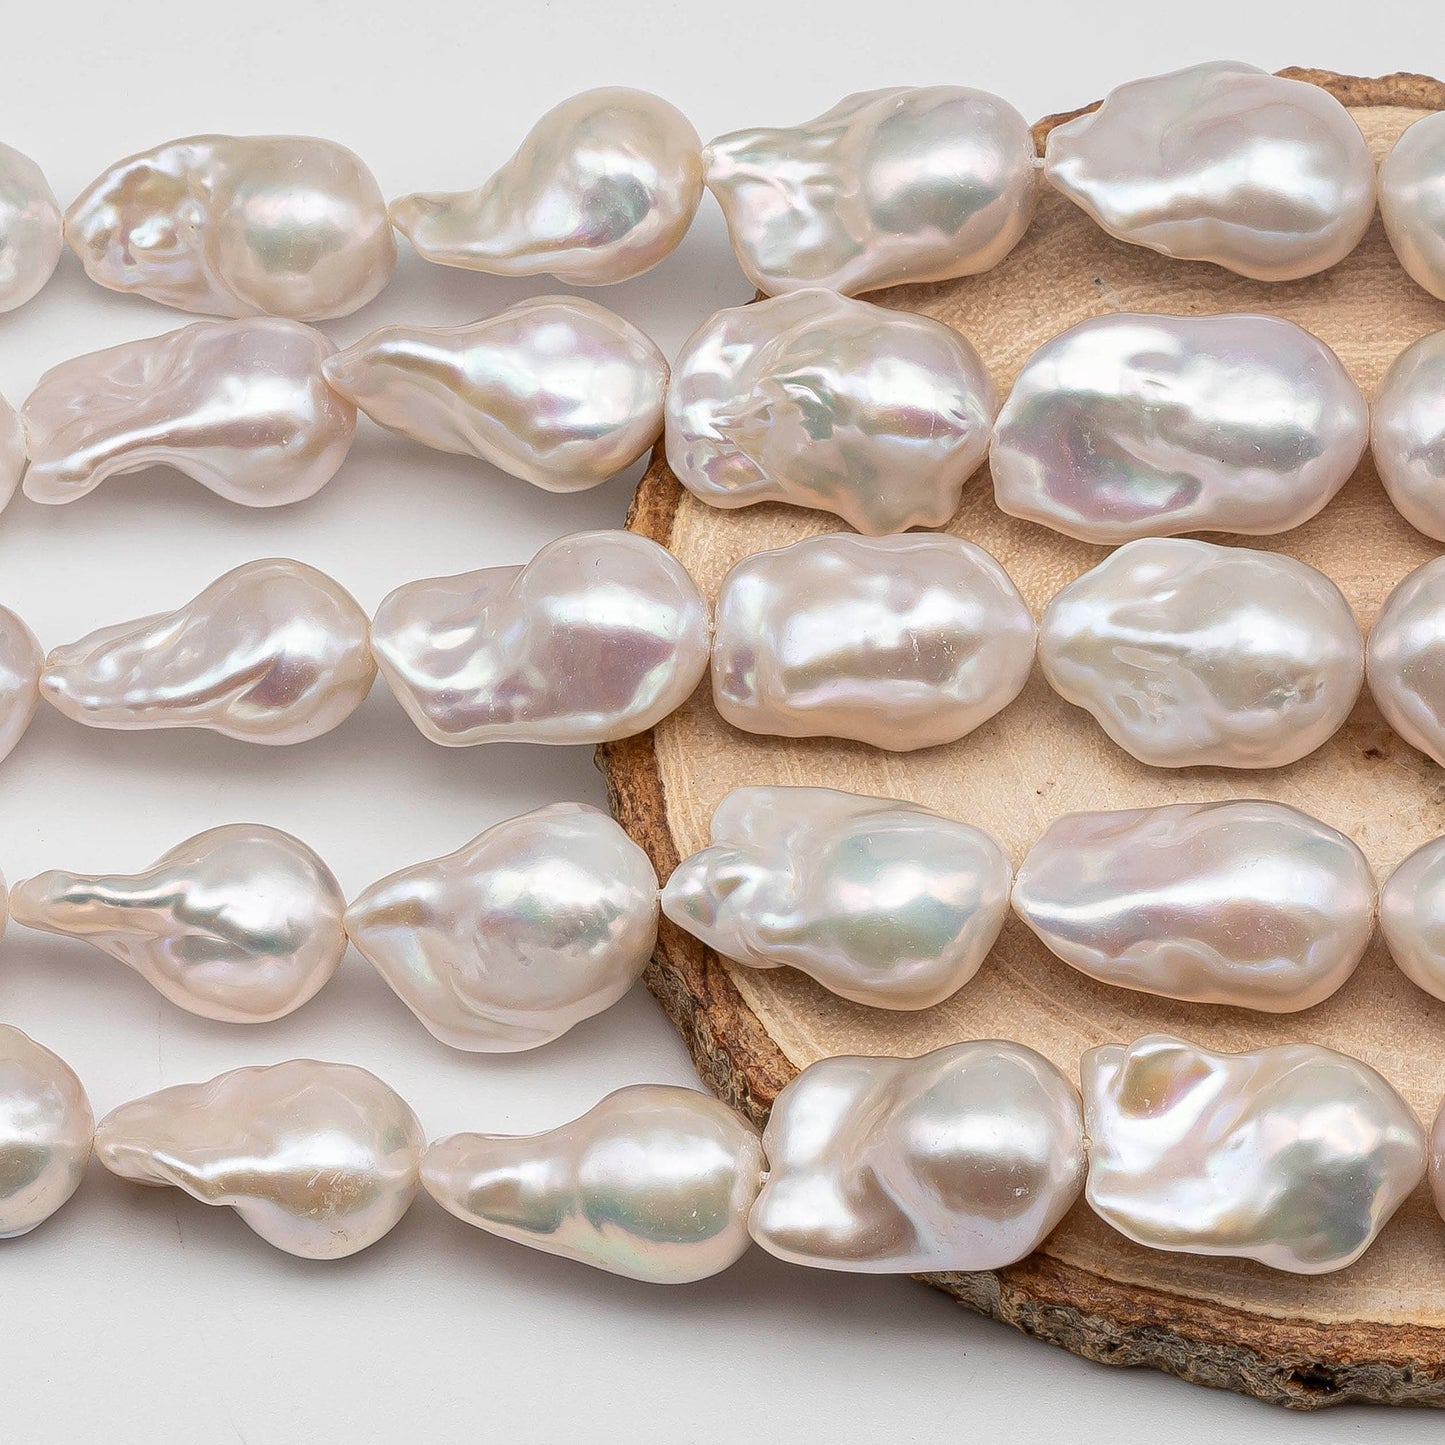 13-16mm AAA Freshwater Baroque Pearl in High Quality Luster in Full Strand, SKU # 1438BA